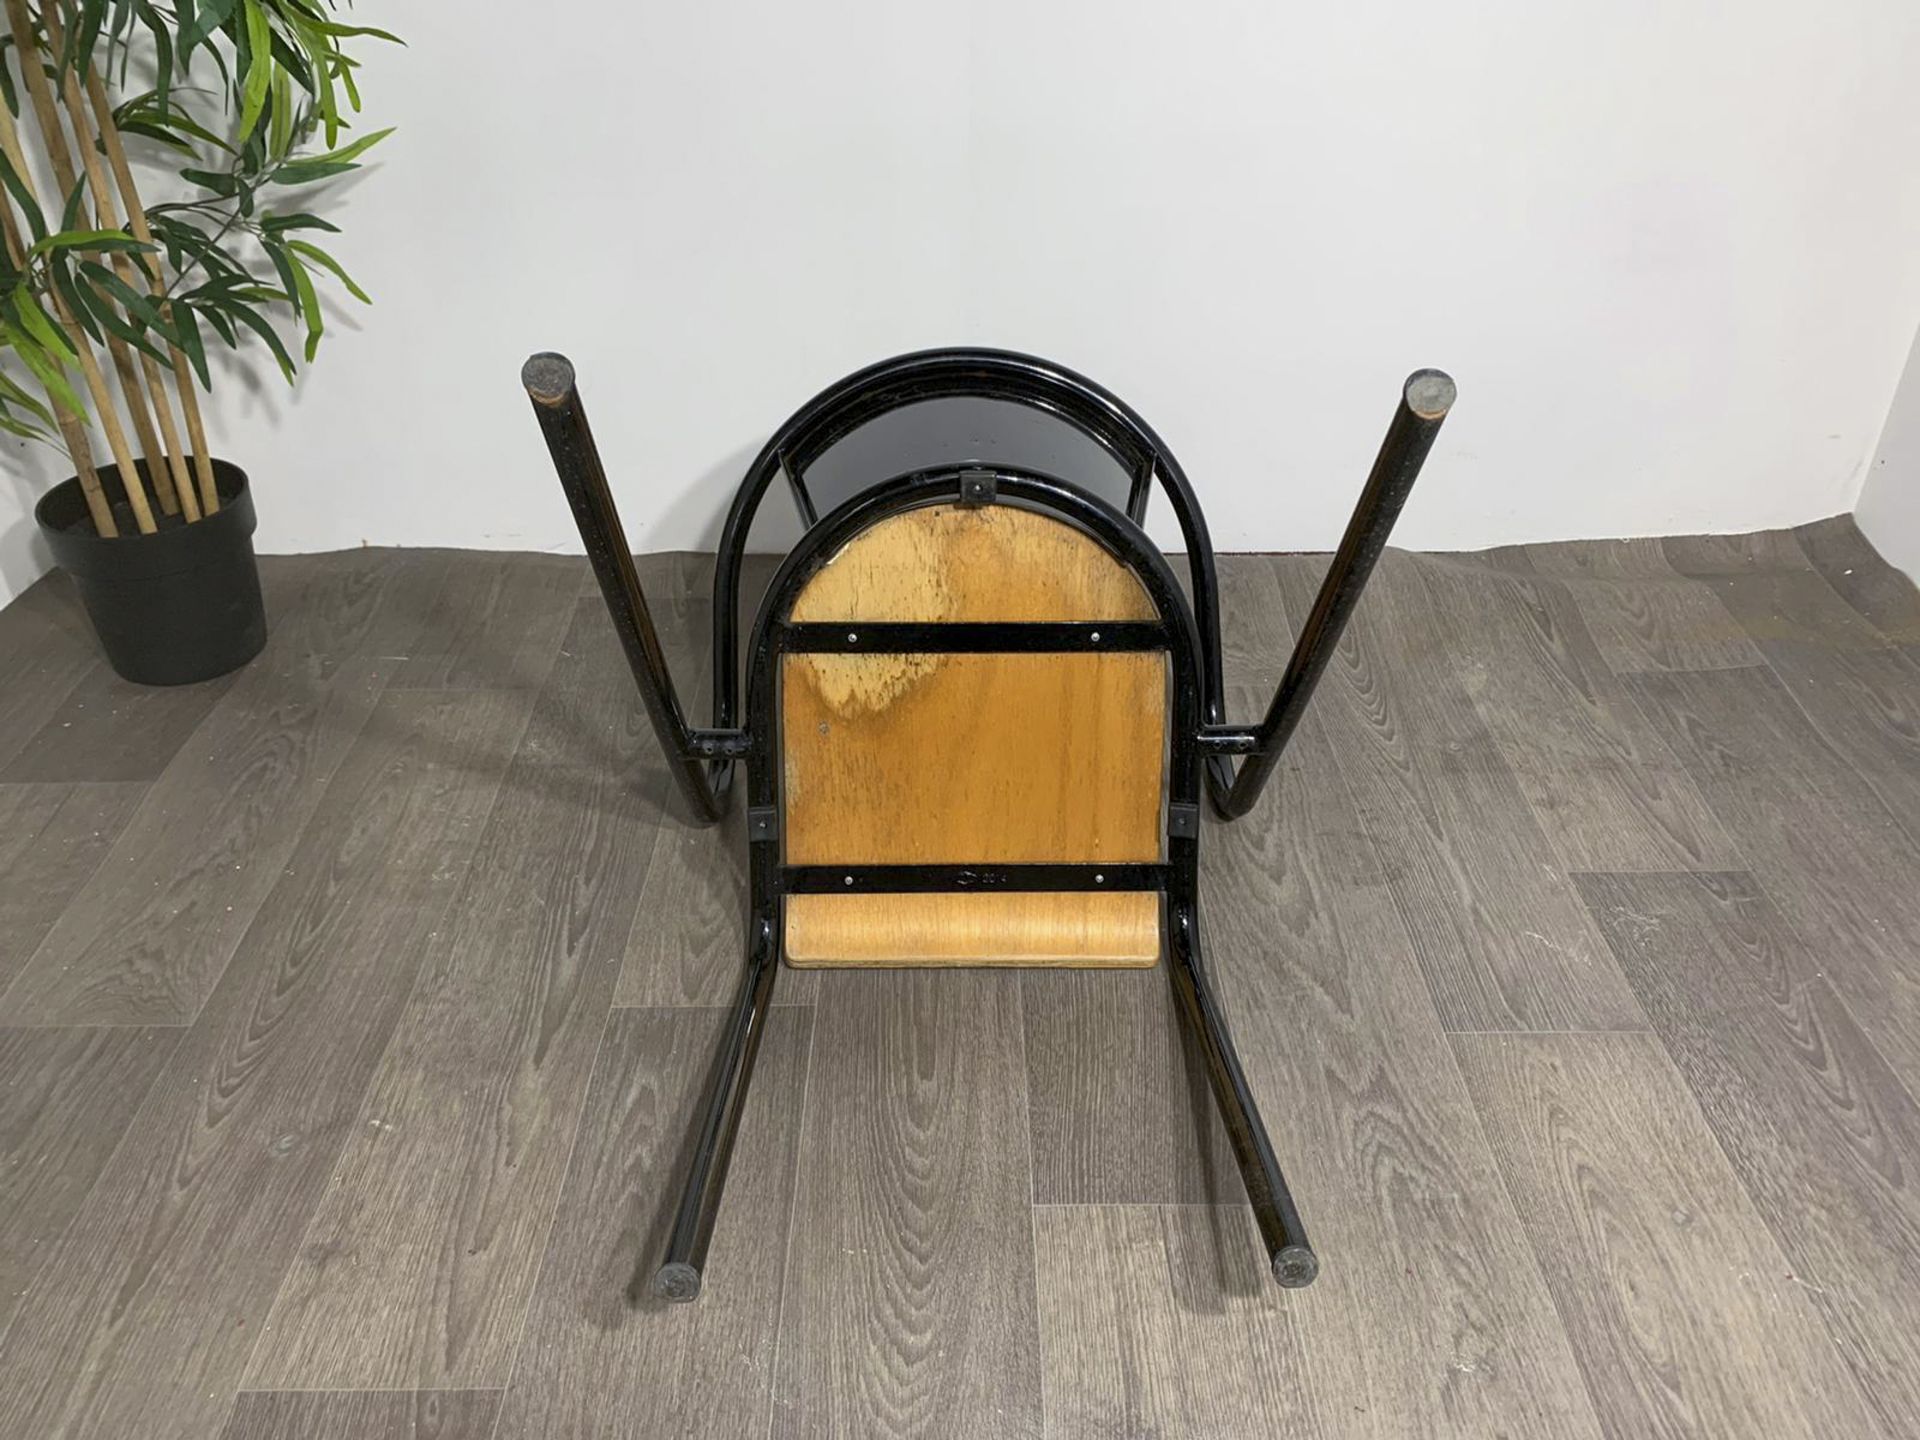 Adico 5008 Black Chair With Wooden Seat - Image 7 of 8